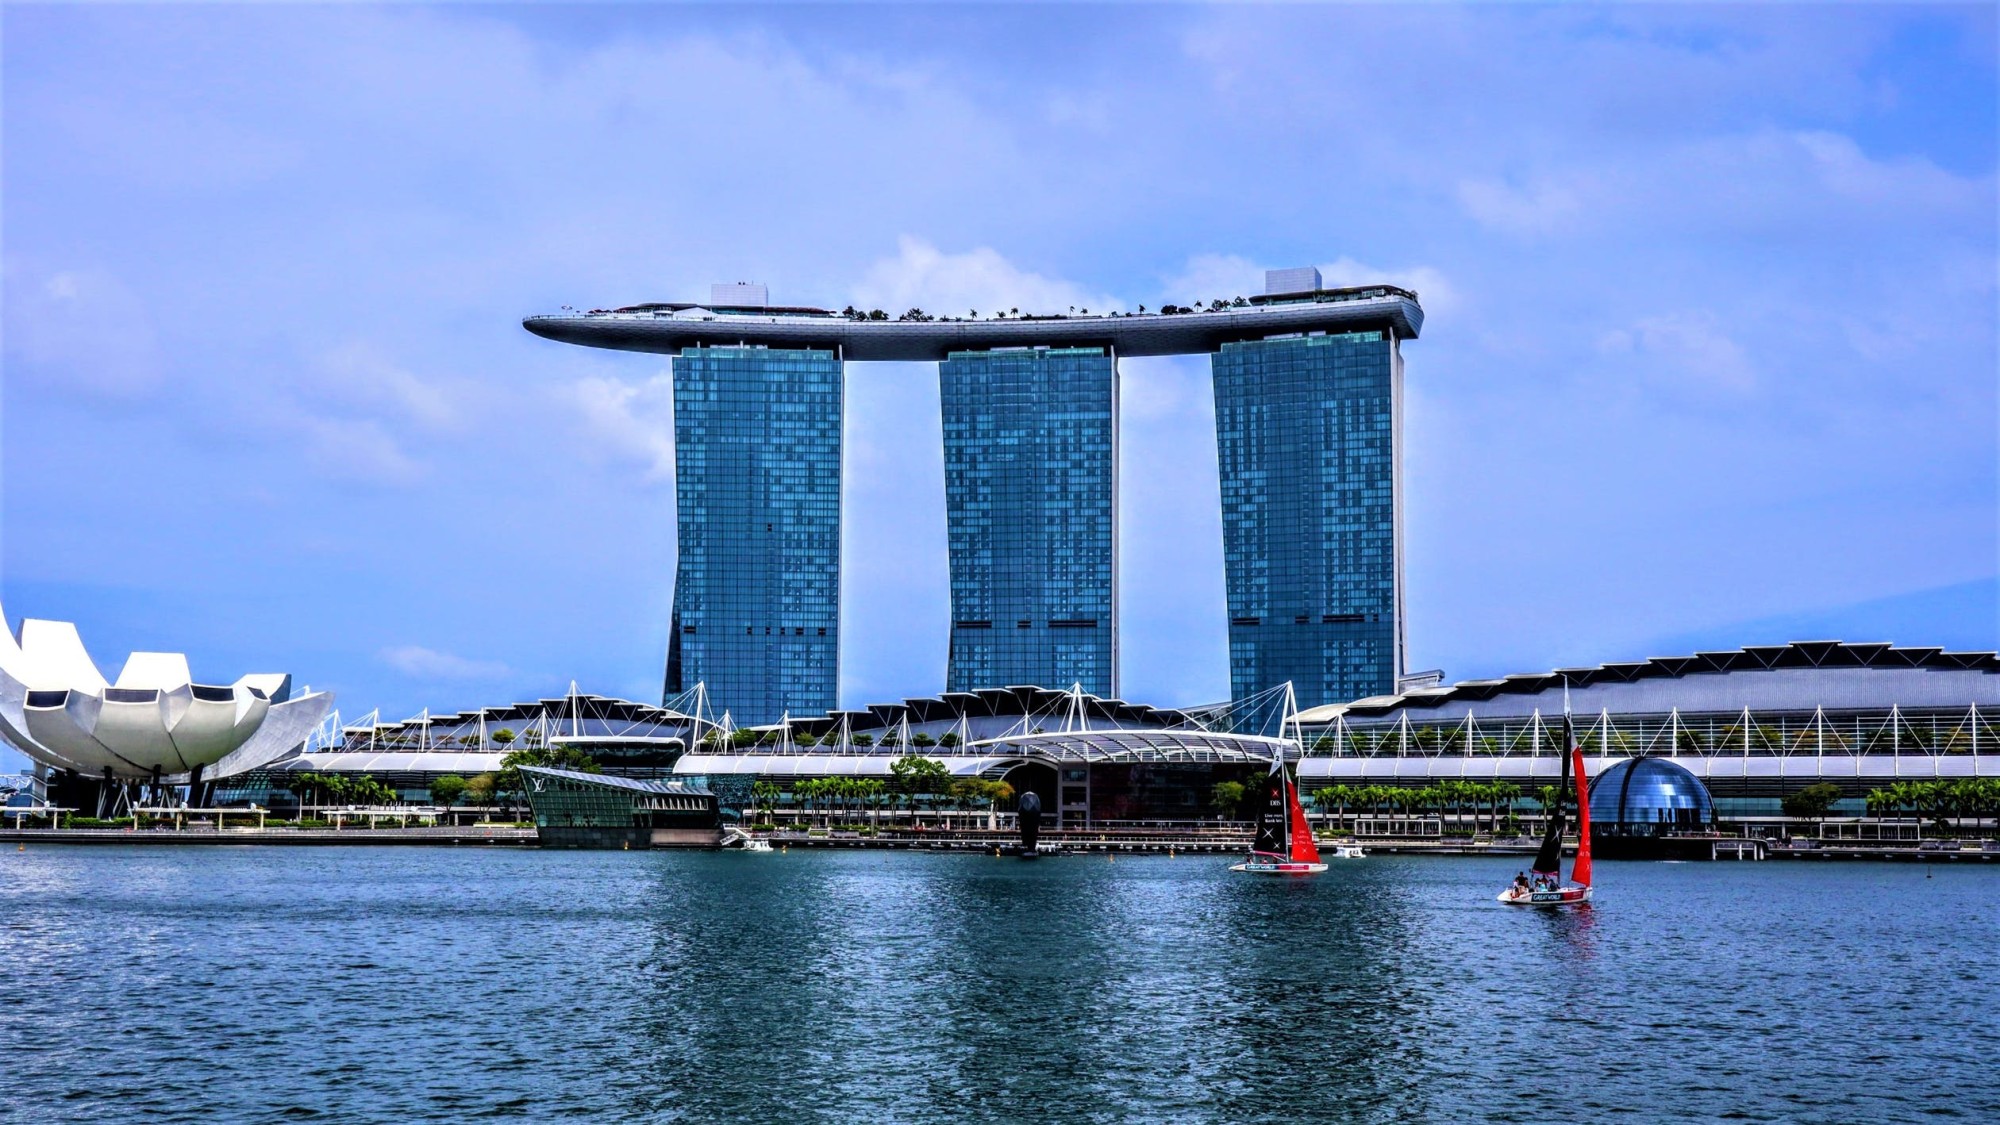 The Singapore Water Story - Sustainable Development in an Urban City-State